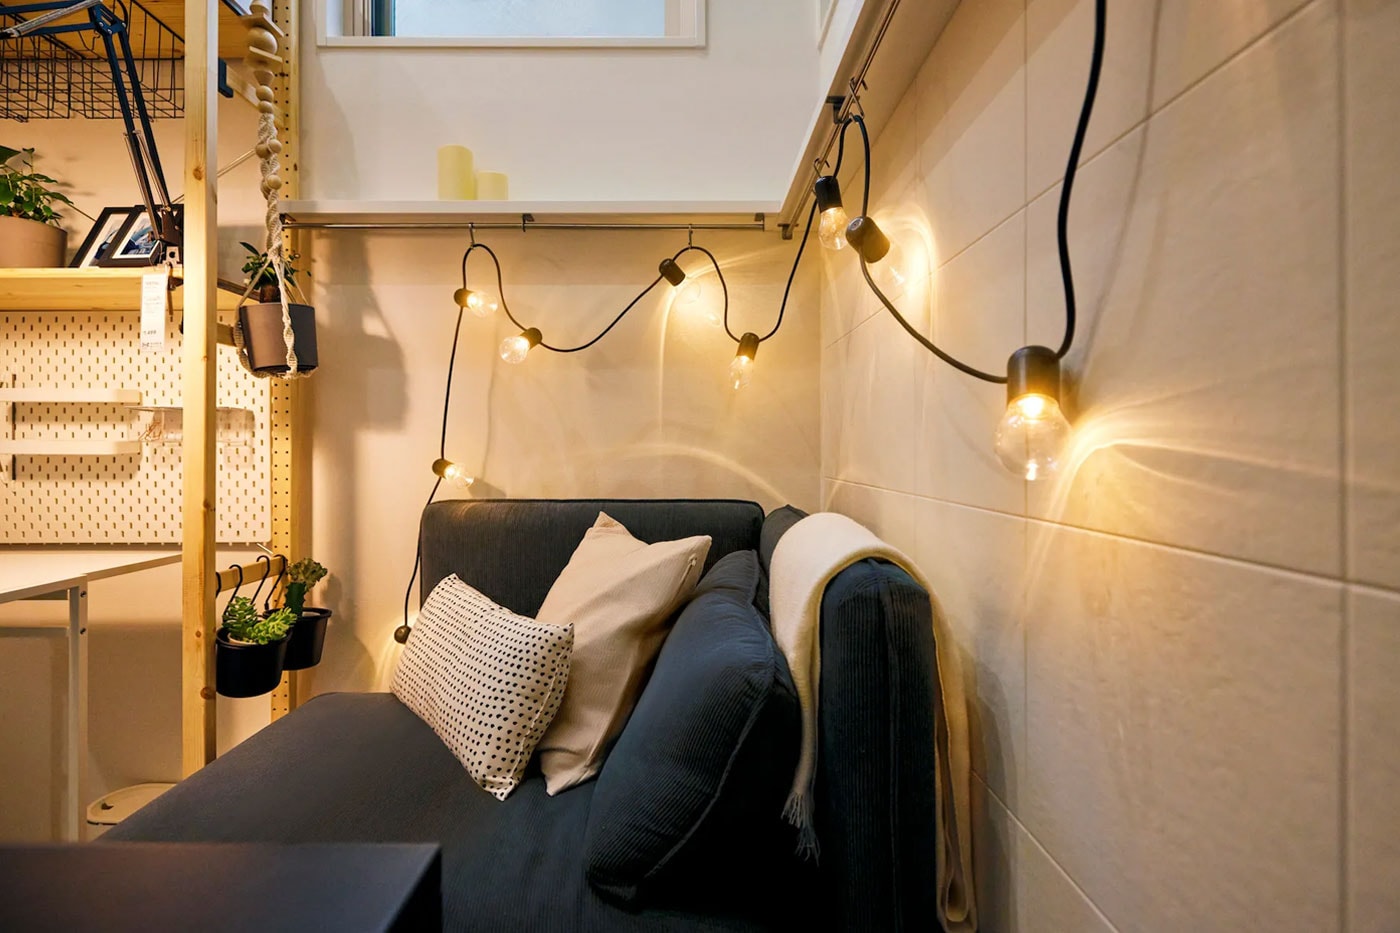 IKEA Japan Is Renting "Tiny Homes" in Tokyo for Under $1 USD a Month Blahaj shark real estate agent four episodes 99 JPY ivar storage muddus drop leaf table trotten wifi speaker lamp news